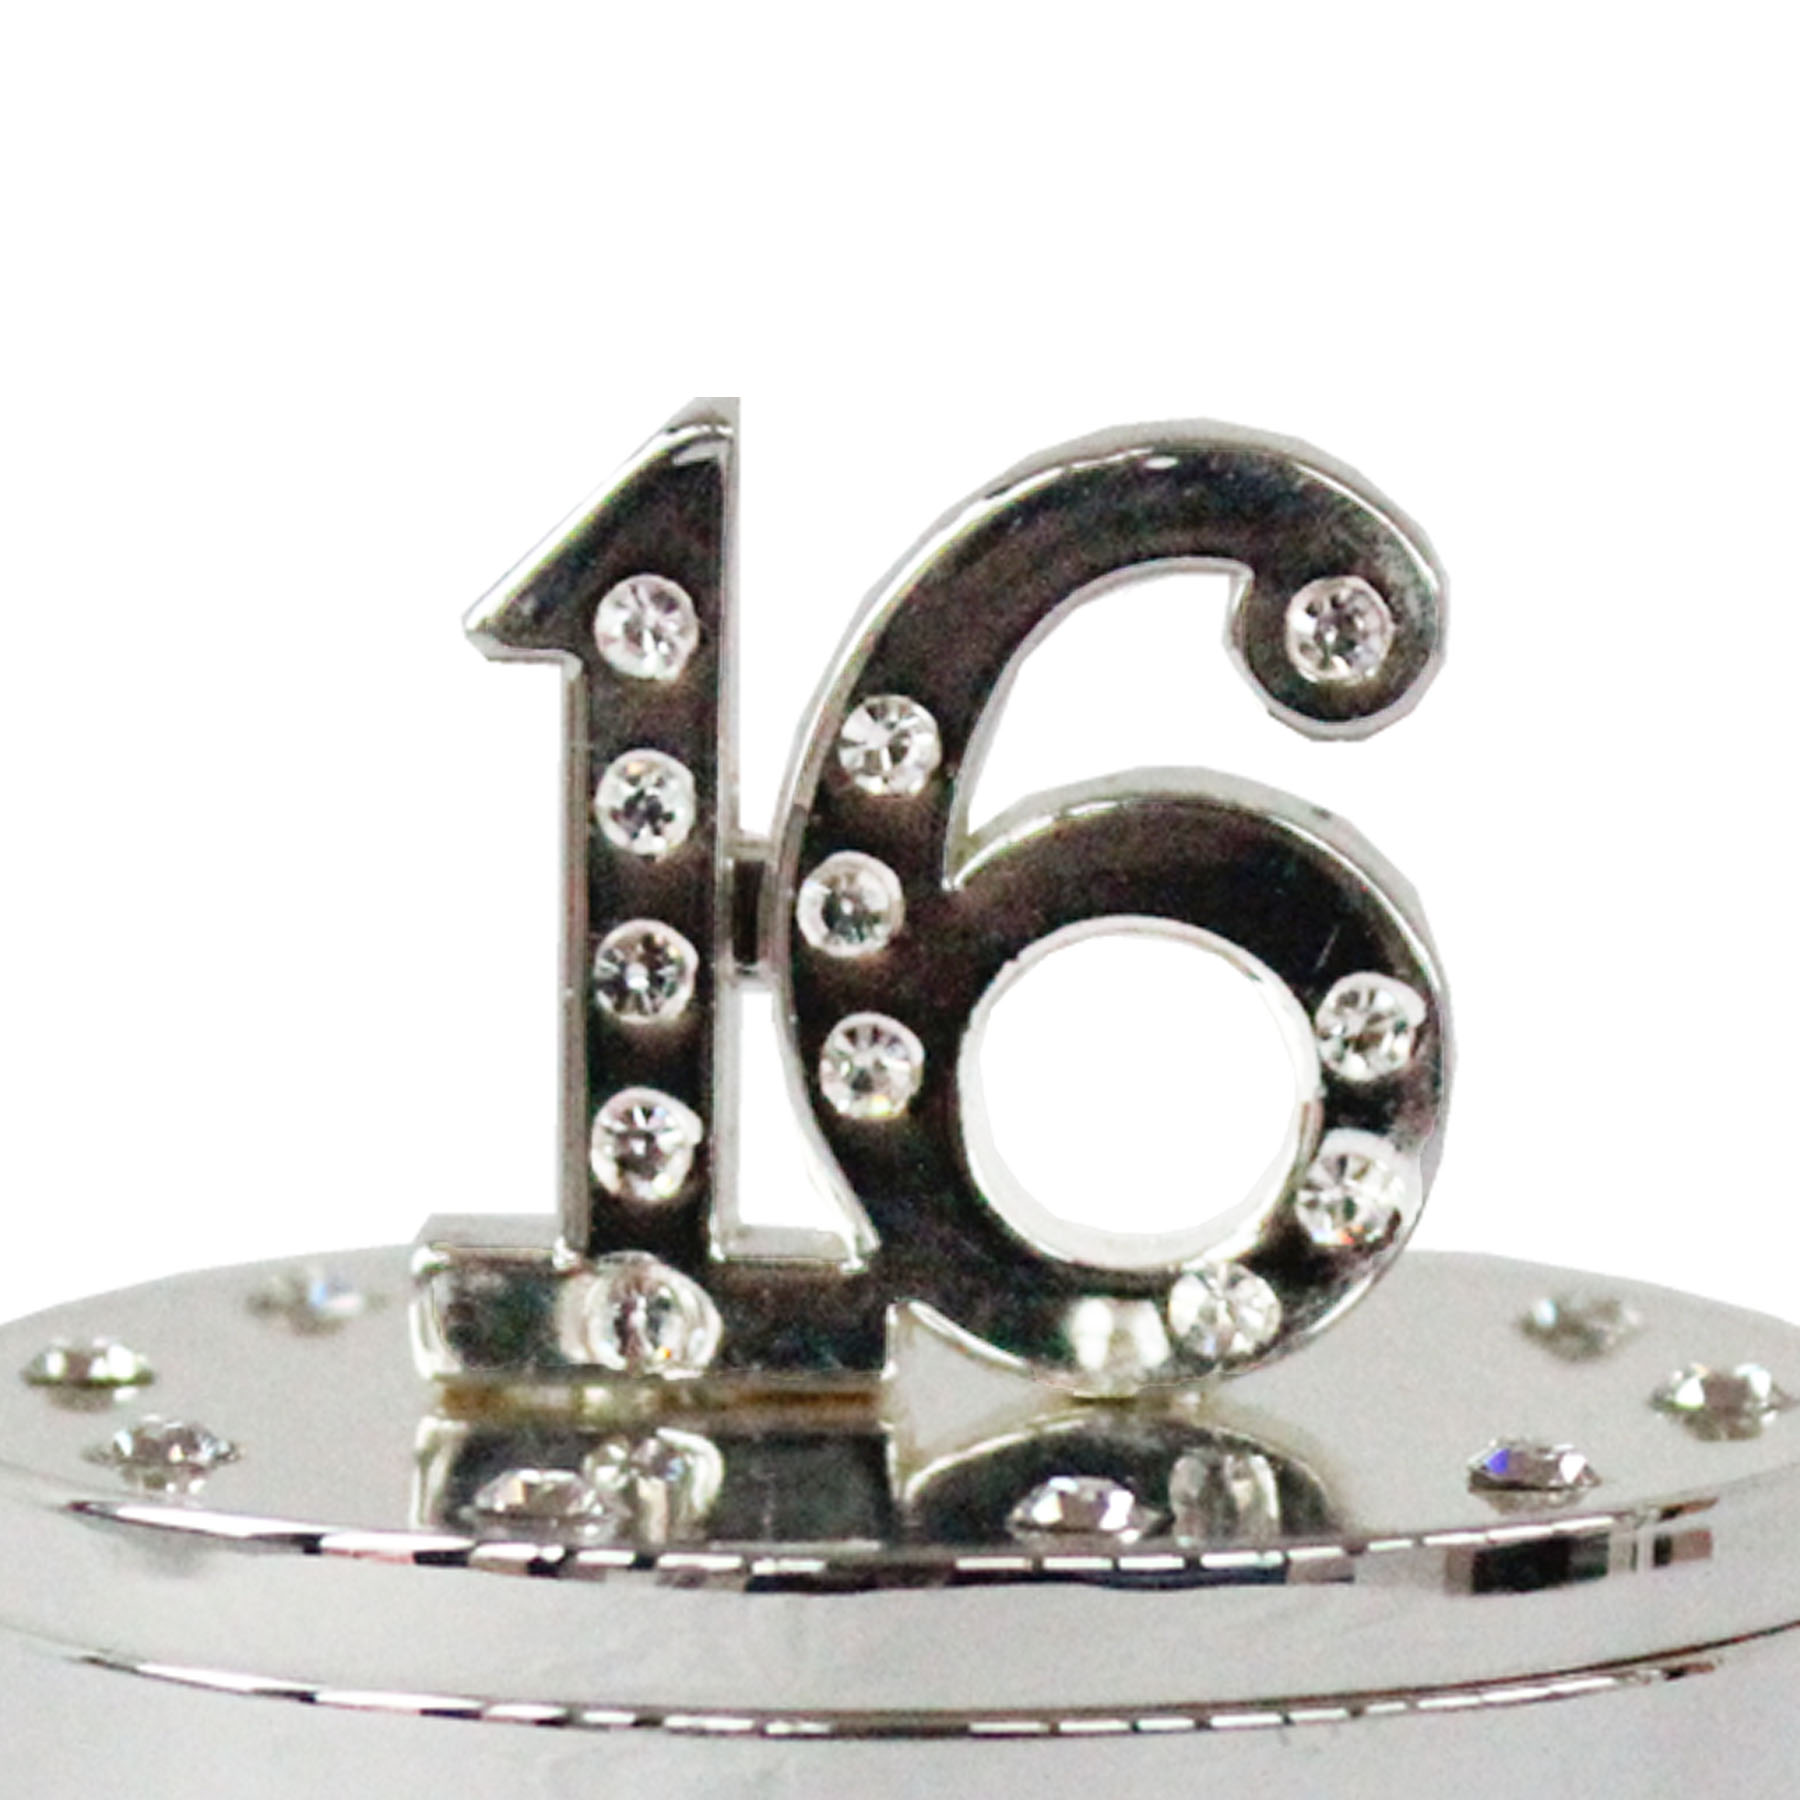 Milestones Silver and Diamante Trinket Box with Number Top - 16th Birthday